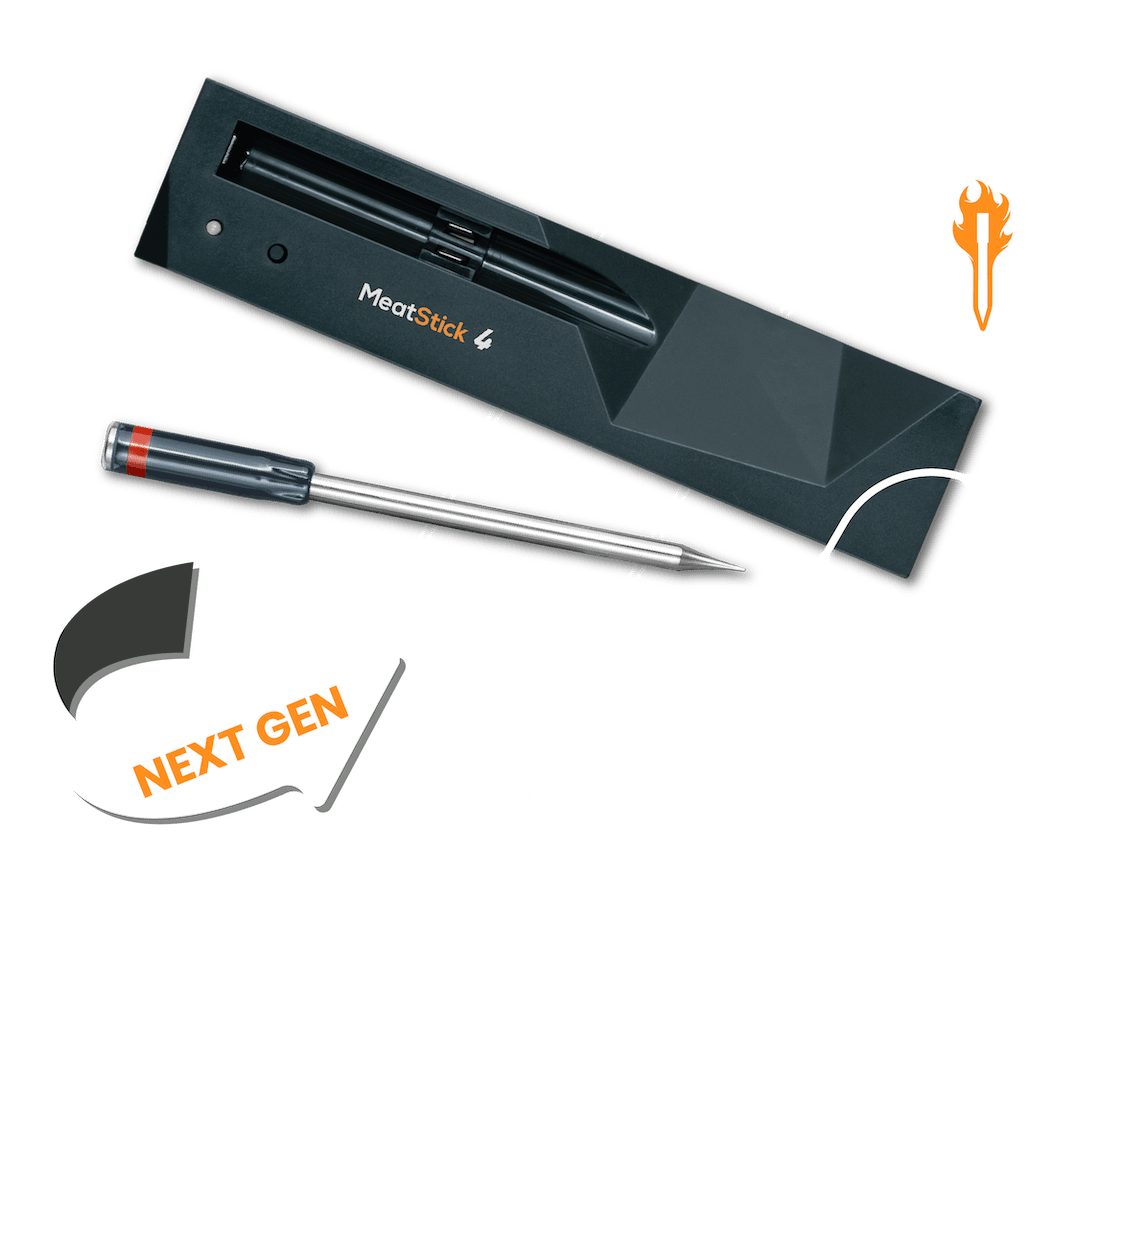 MeatStick 4 Next Gen Quad Sensors Wireless Meat Thermometer for The BBQ Lover